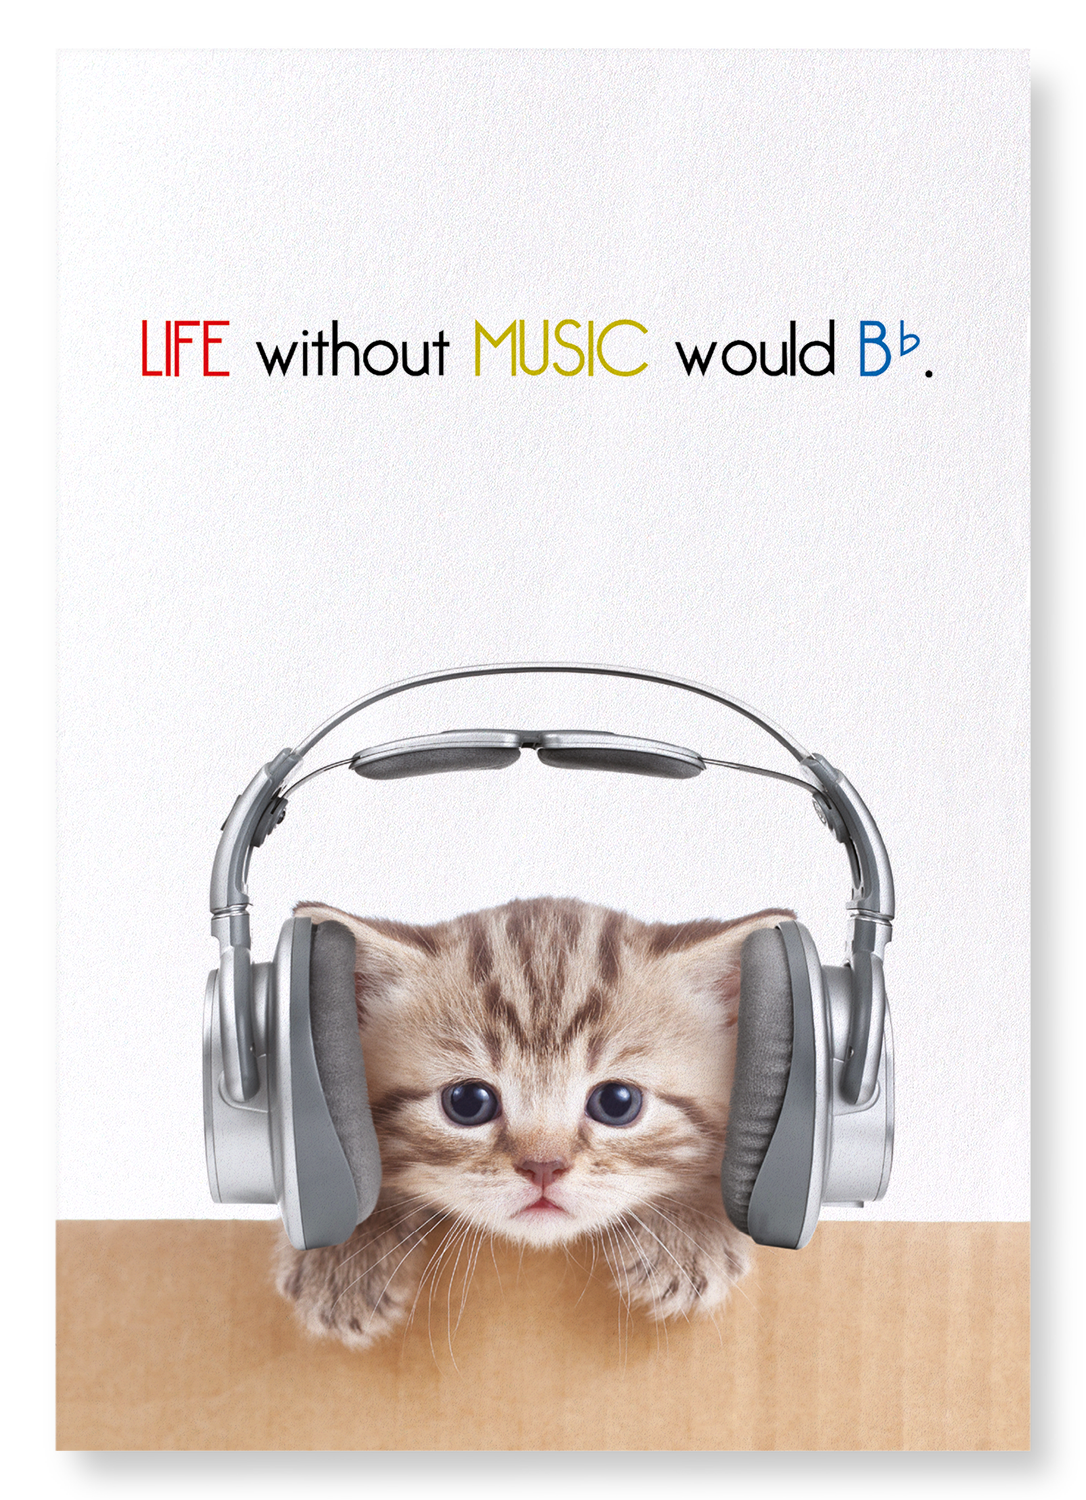 LIFE WITHOUT MUSIC WOULD BE FLAT